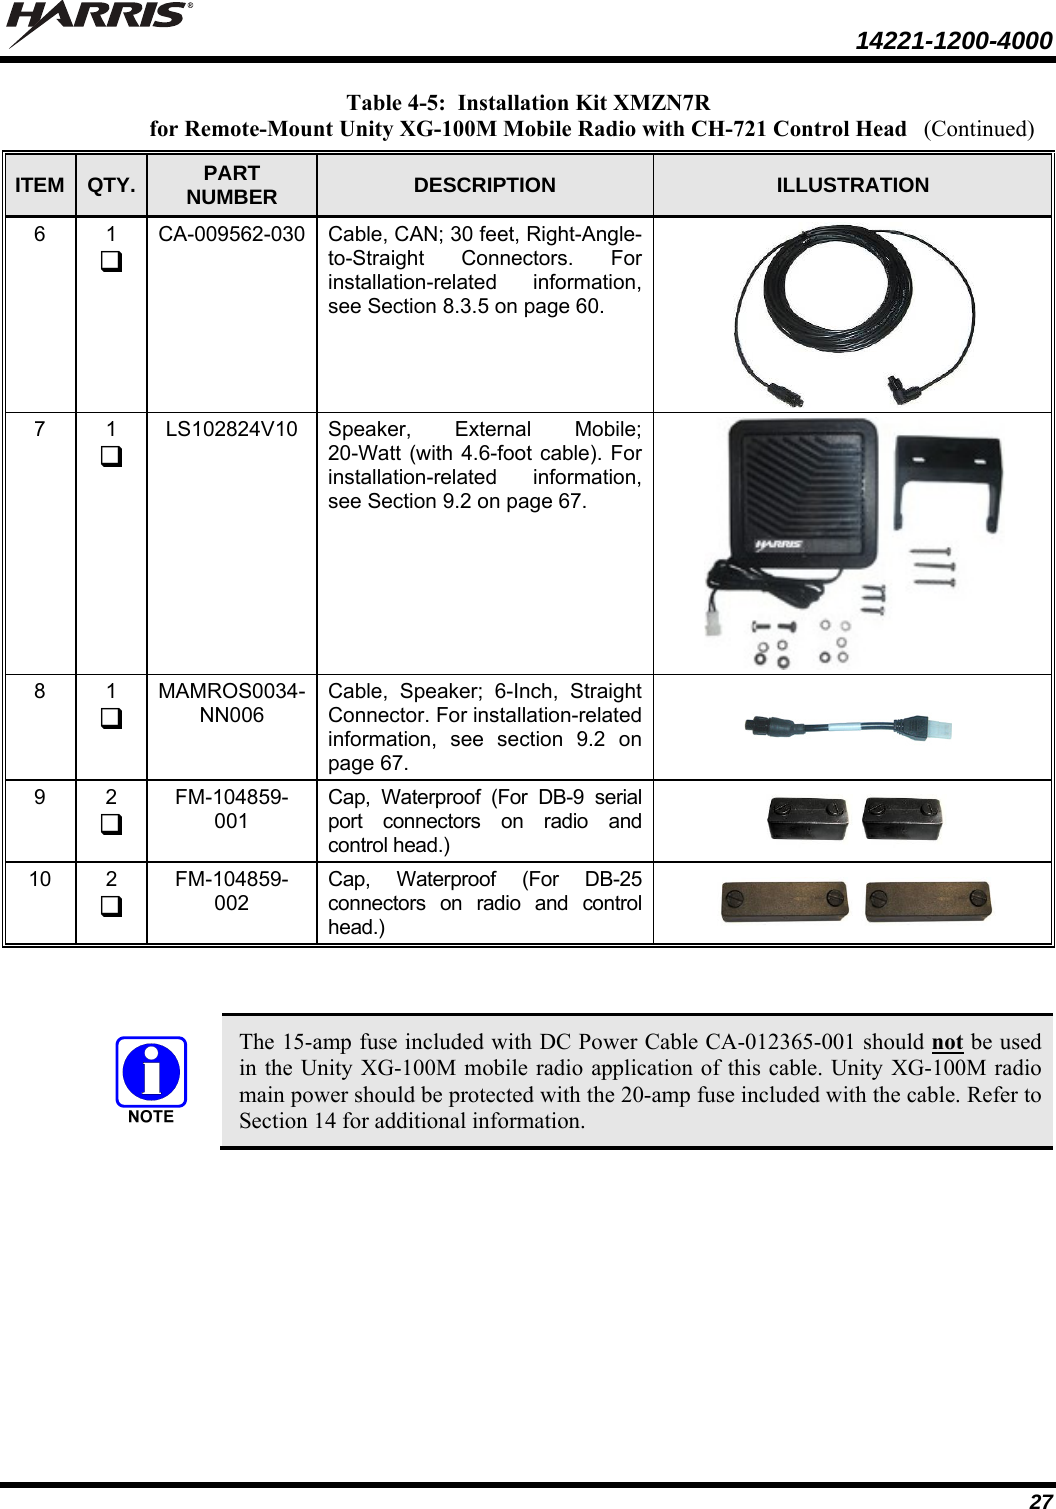  14221-1200-4000  27 Table 4-5:  Installation Kit XMZN7R for Remote-Mount Unity XG-100M Mobile Radio with CH-721 Control Head ITEM  QTY.  PART NUMBER  DESCRIPTION  ILLUSTRATION 6  1  CA-009562-030  Cable, CAN; 30 feet, Right-Angle-to-Straight Connectors. For installation-related information, see Section 8.3.5 on page 60. 7  1  LS102824V10  Speaker, External Mobile; 20-Watt (with 4.6-foot cable). For installation-related information, see Section 9.2 on page 67. 8  1  MAMROS0034-NN006 Cable, Speaker; 6-Inch, Straight Connector. For installation-related information, see section 9.2 on page 67.   9  2  FM-104859-001 Cap, Waterproof (For DB-9 serial port connectors on radio and control head.)   10  2  FM-104859-002 Cap, Waterproof (For DB-25 connectors on radio and control head.)       The 15-amp fuse included with DC Power Cable CA-012365-001 should not be used in the Unity XG-100M mobile radio application of this cable. Unity XG-100M radio main power should be protected with the 20-amp fuse included with the cable. Refer to Section 14 for additional information.   (Continued)